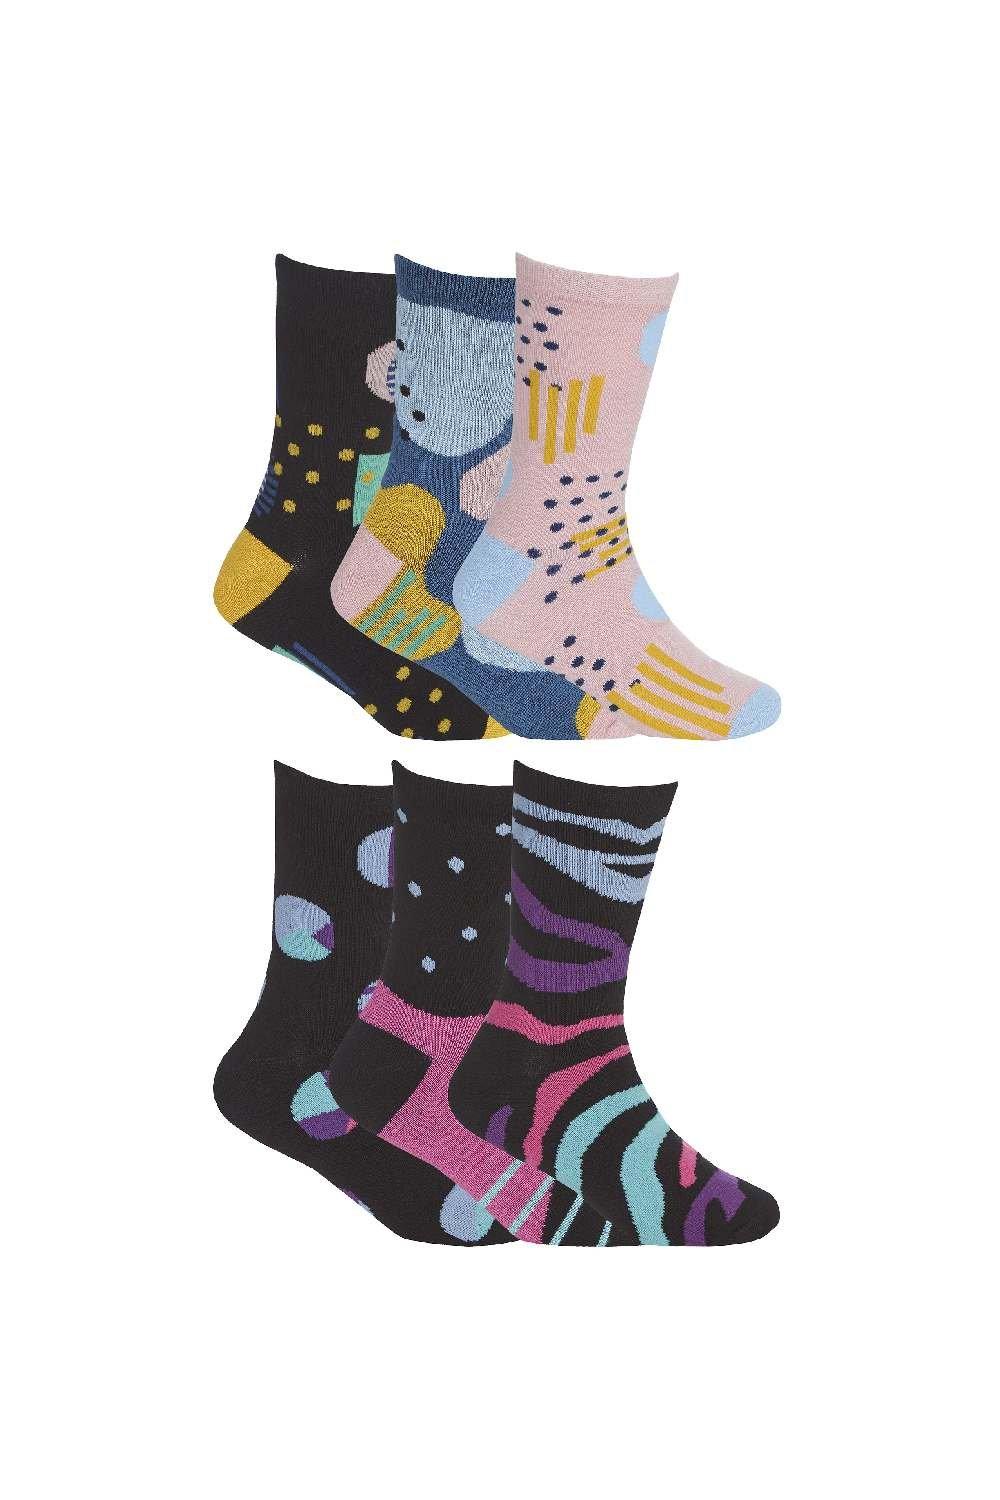 12 Pair Soft Breathable Bamboo Floral & Abstract Pattern Socks